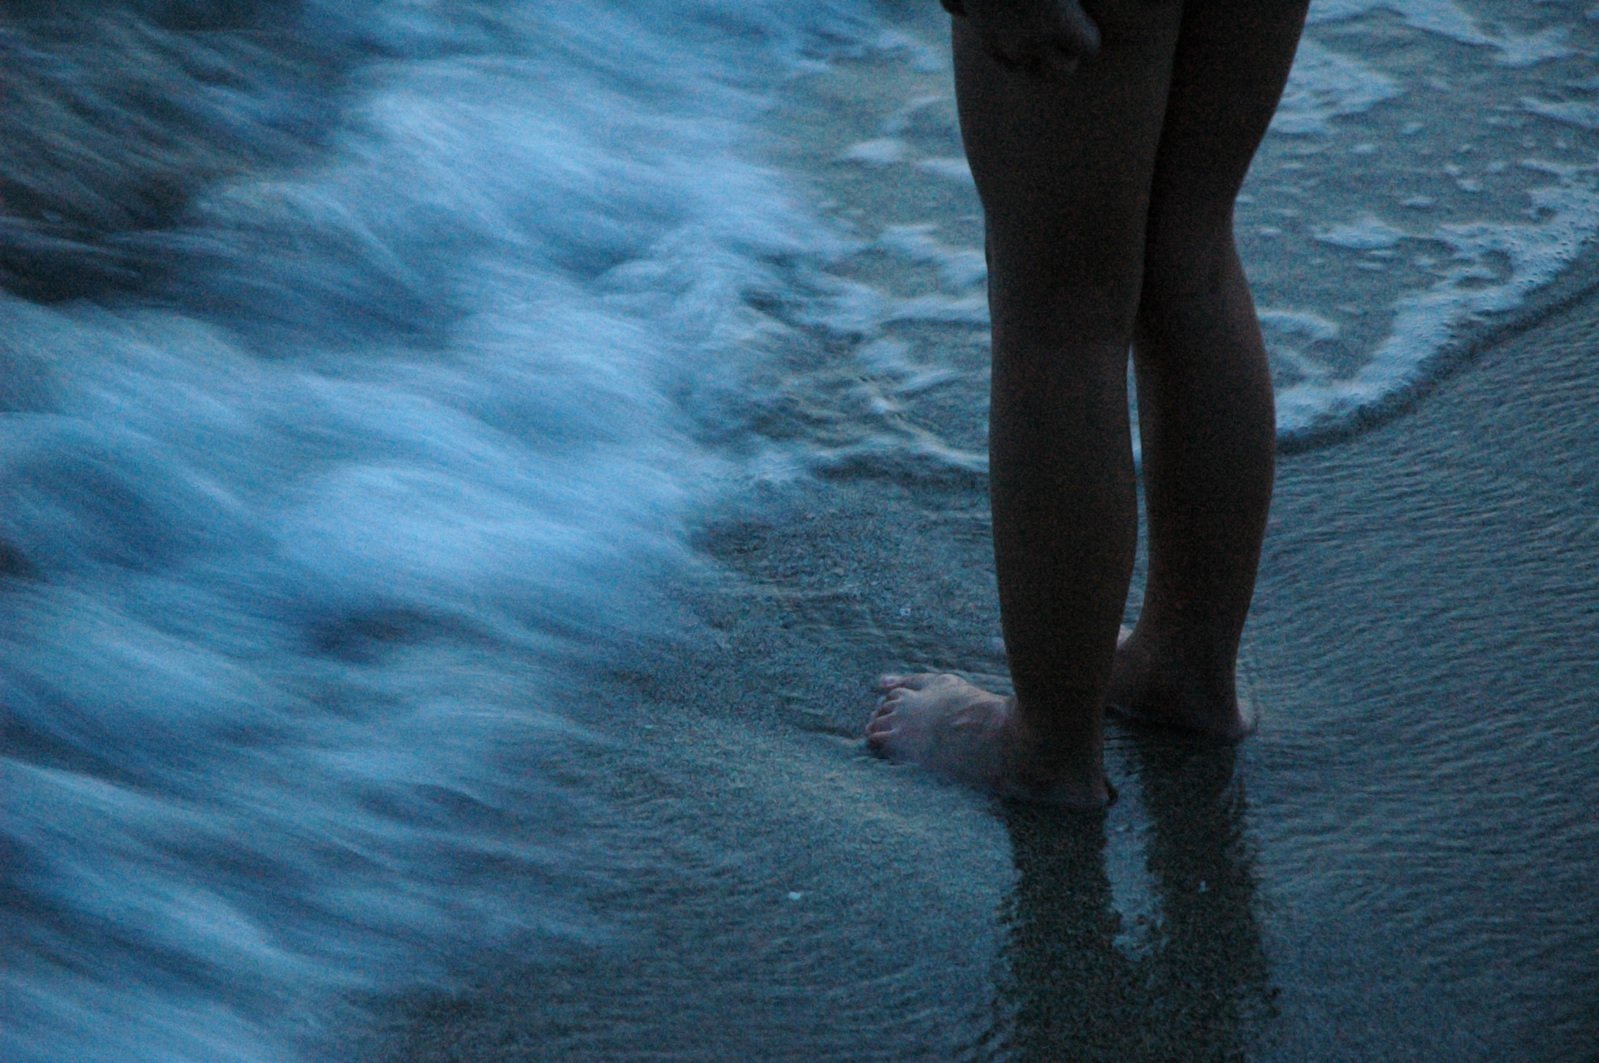 the lower portion of a woman's legs and feet, against a background of dark blue water and foam